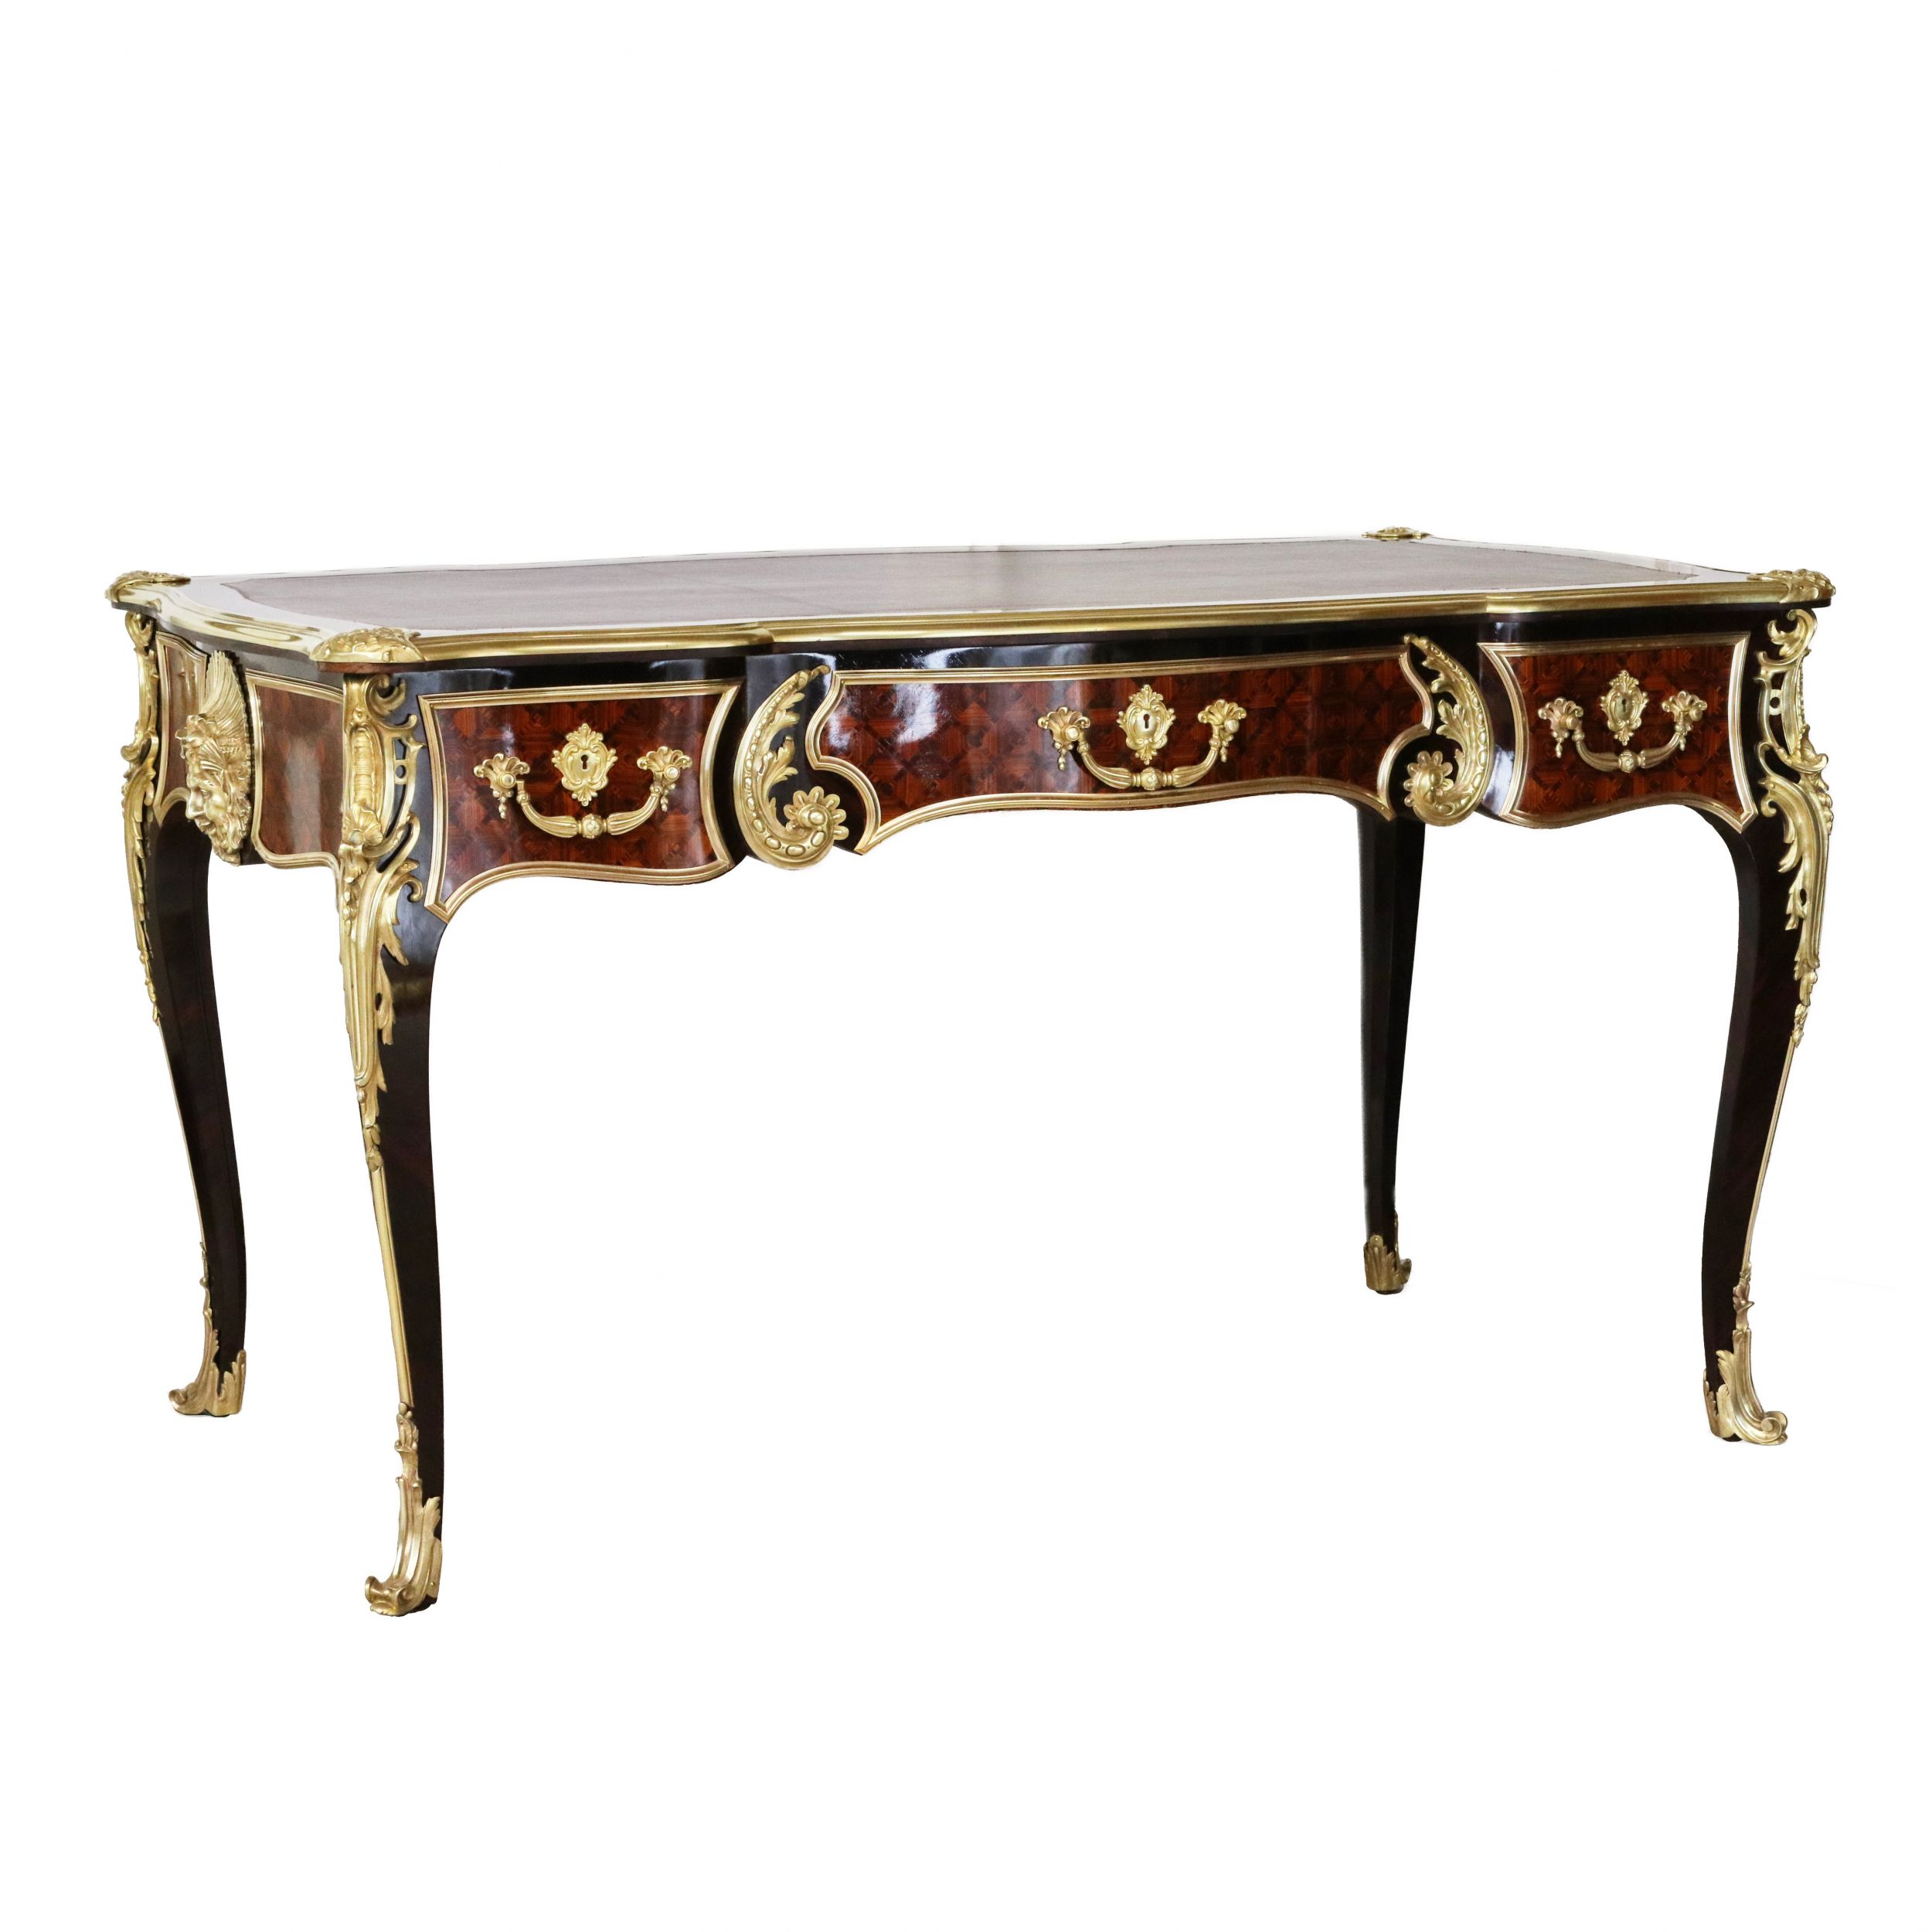 Magnificent writing desk in wood and gilded bronze, Louis XV style. - Image 5 of 8